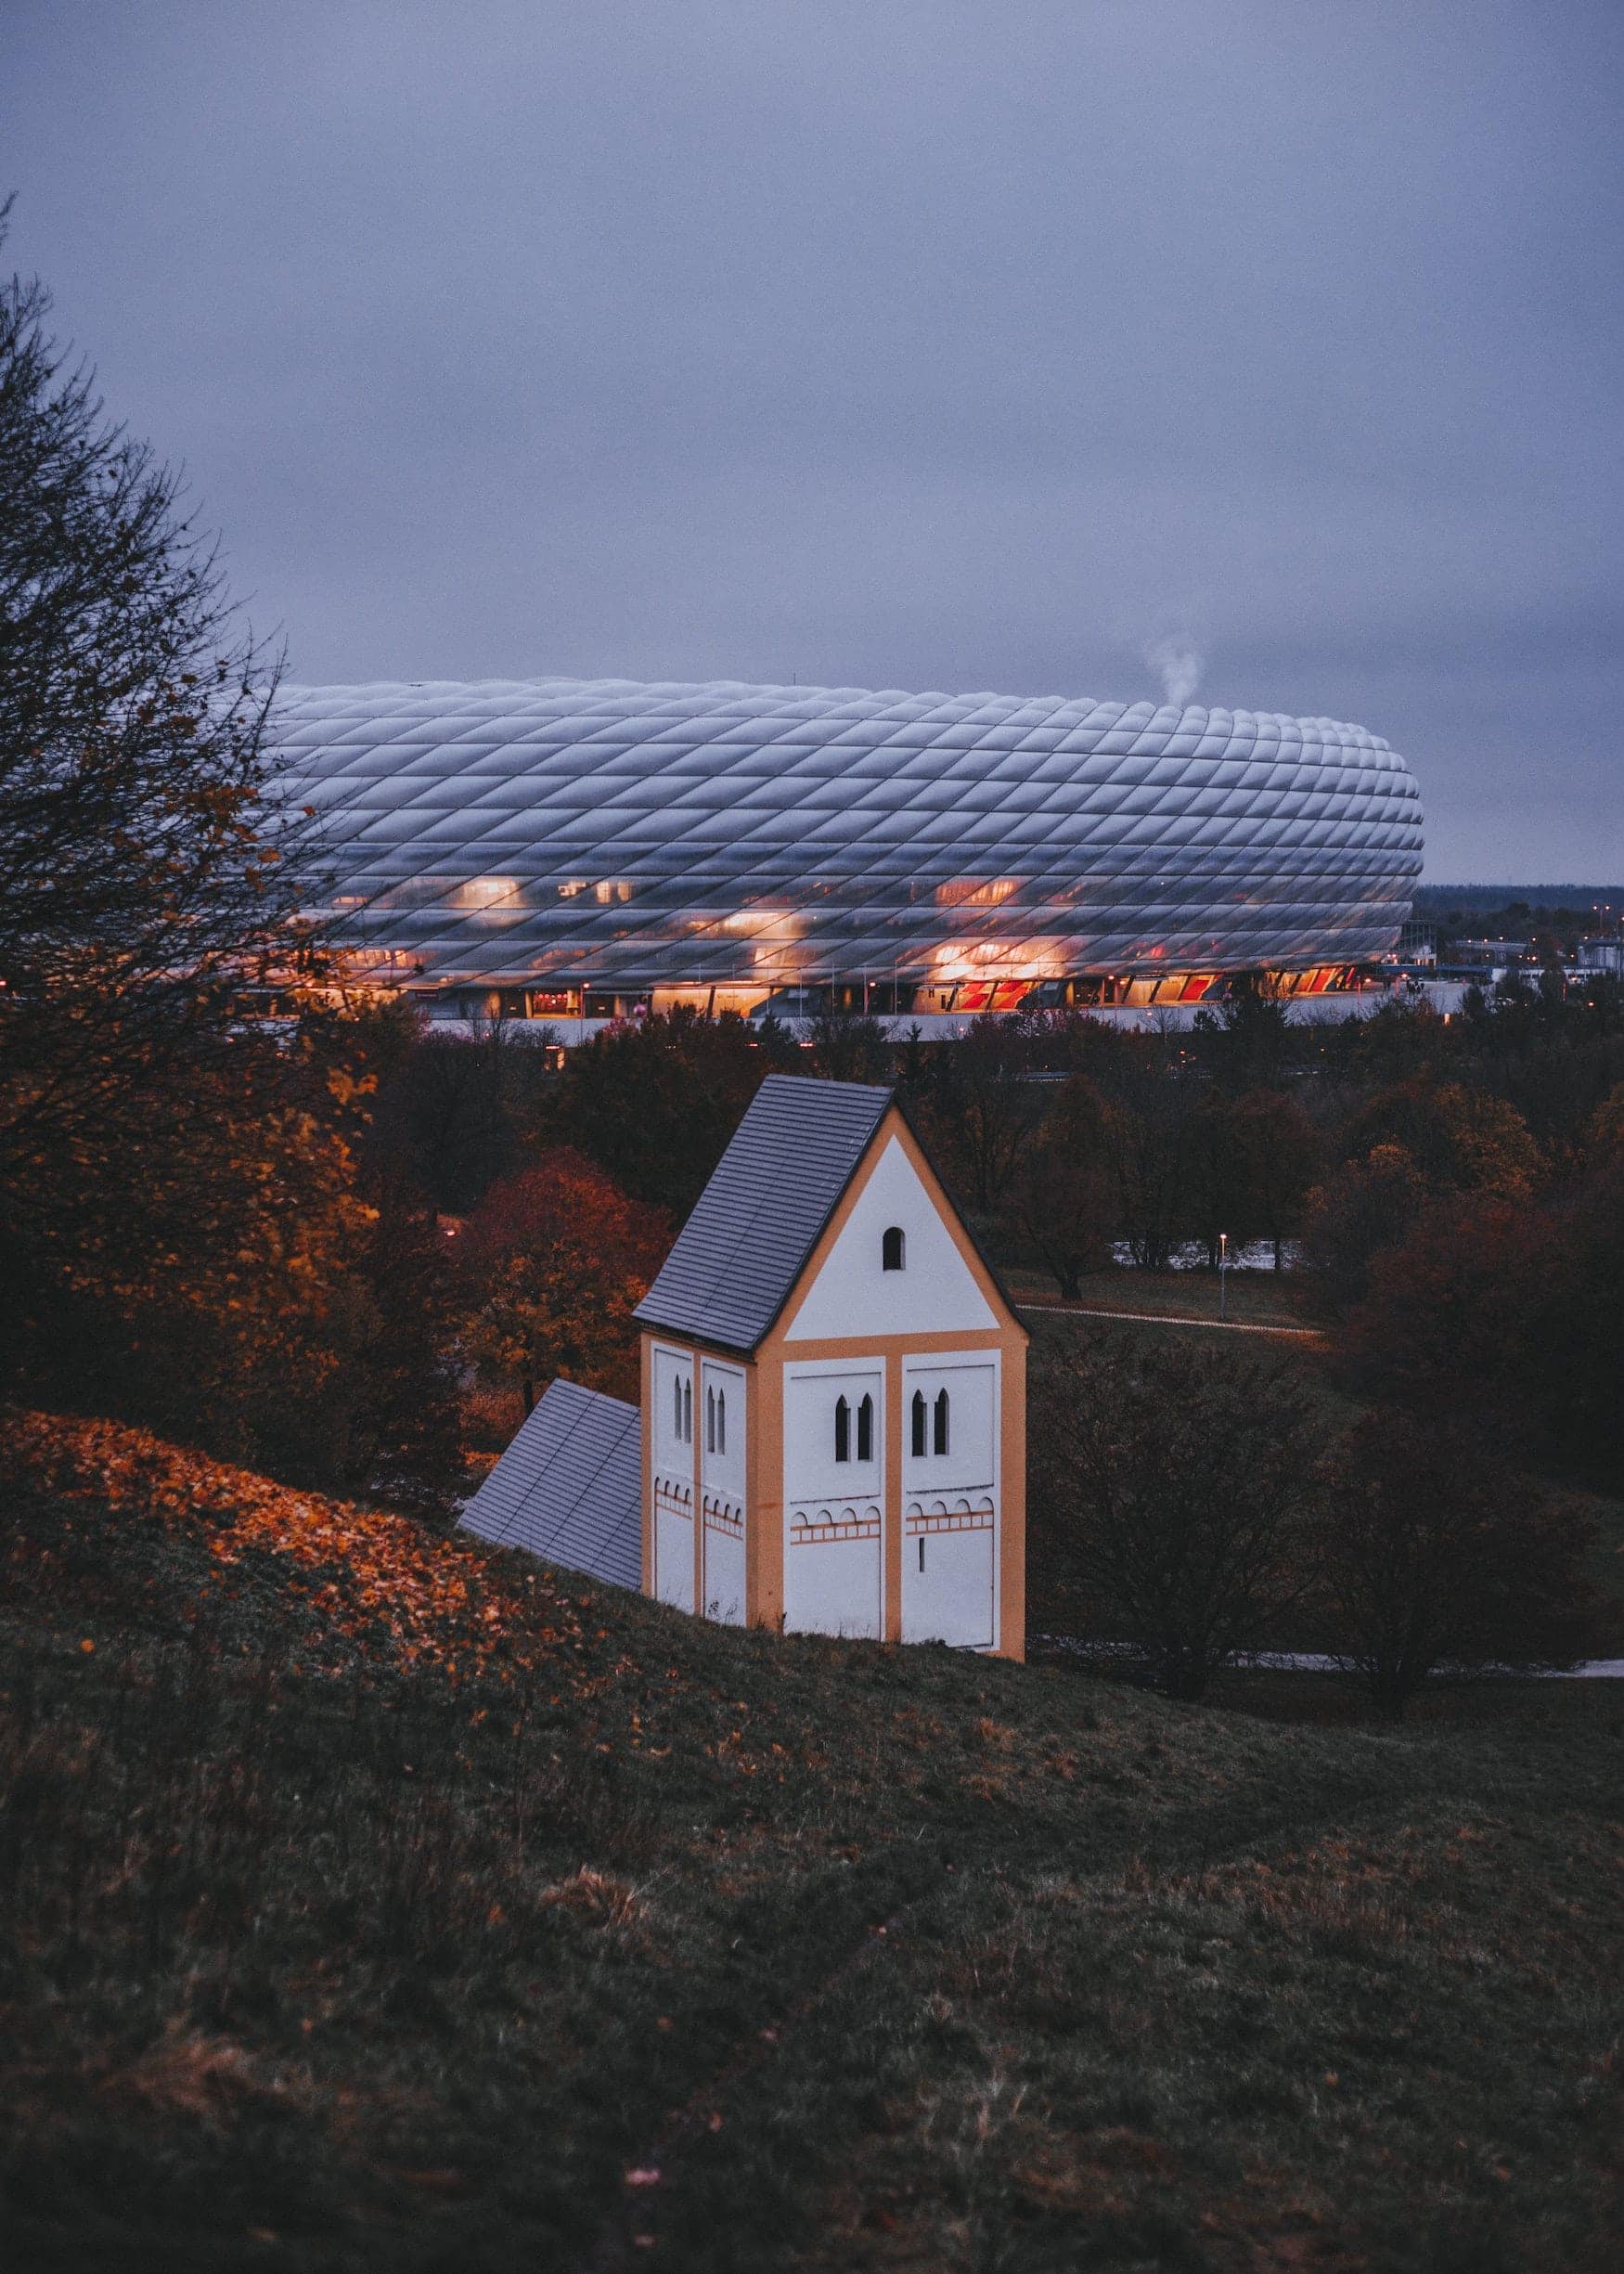 Allianz Arena behind white and yellow tower in Bavarian landscape in the evening